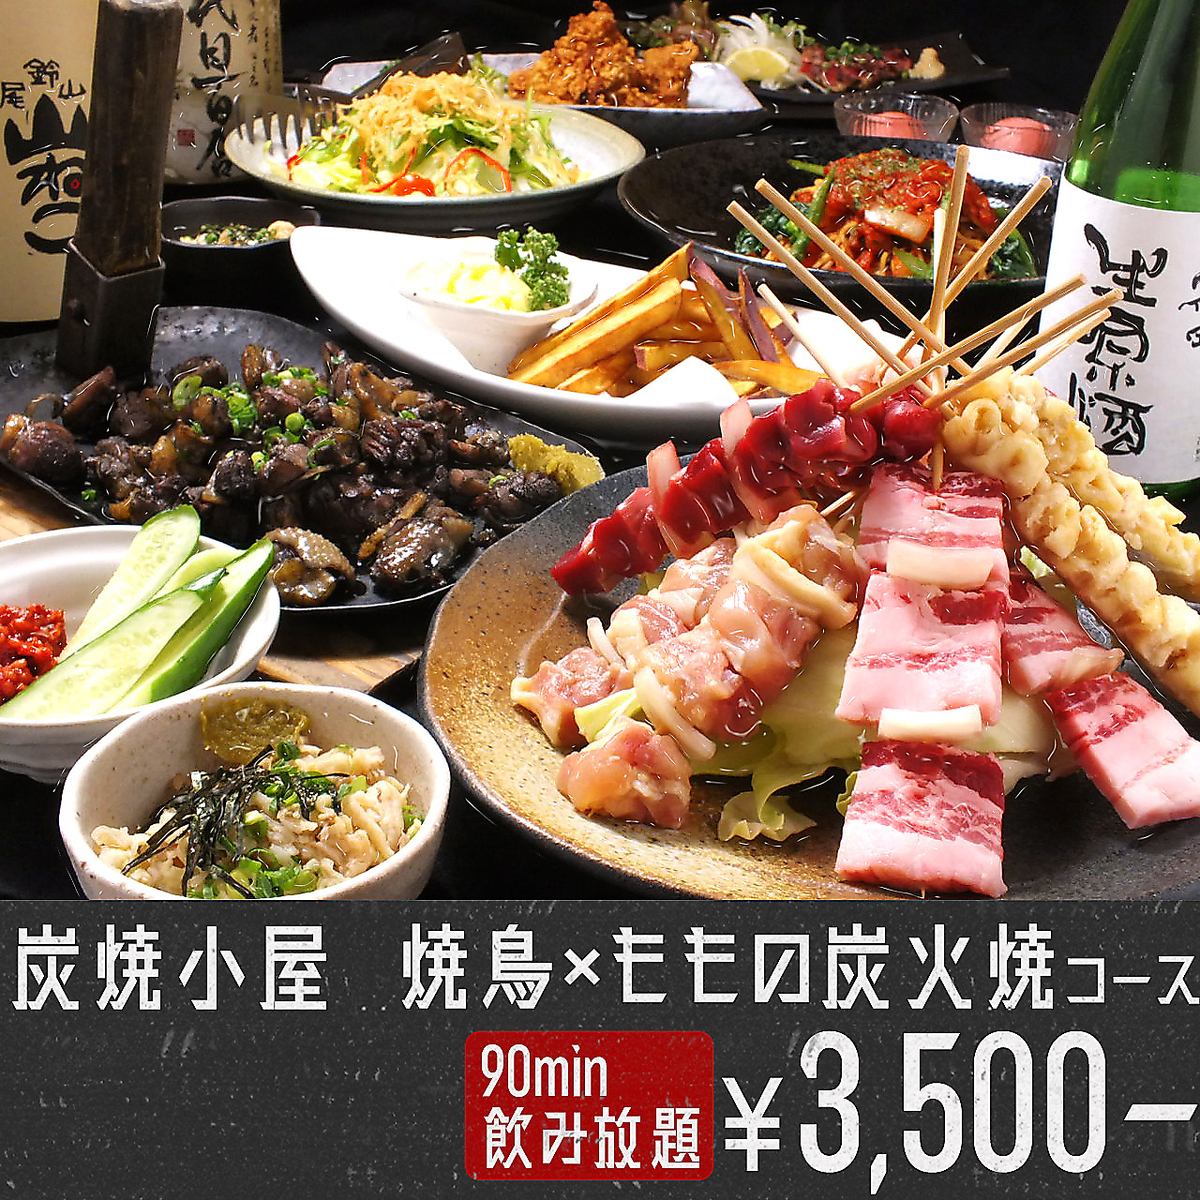 All-you-can-drink course with draft beer starts from 4,000 yen! Even better deals are available on weekdays ◎